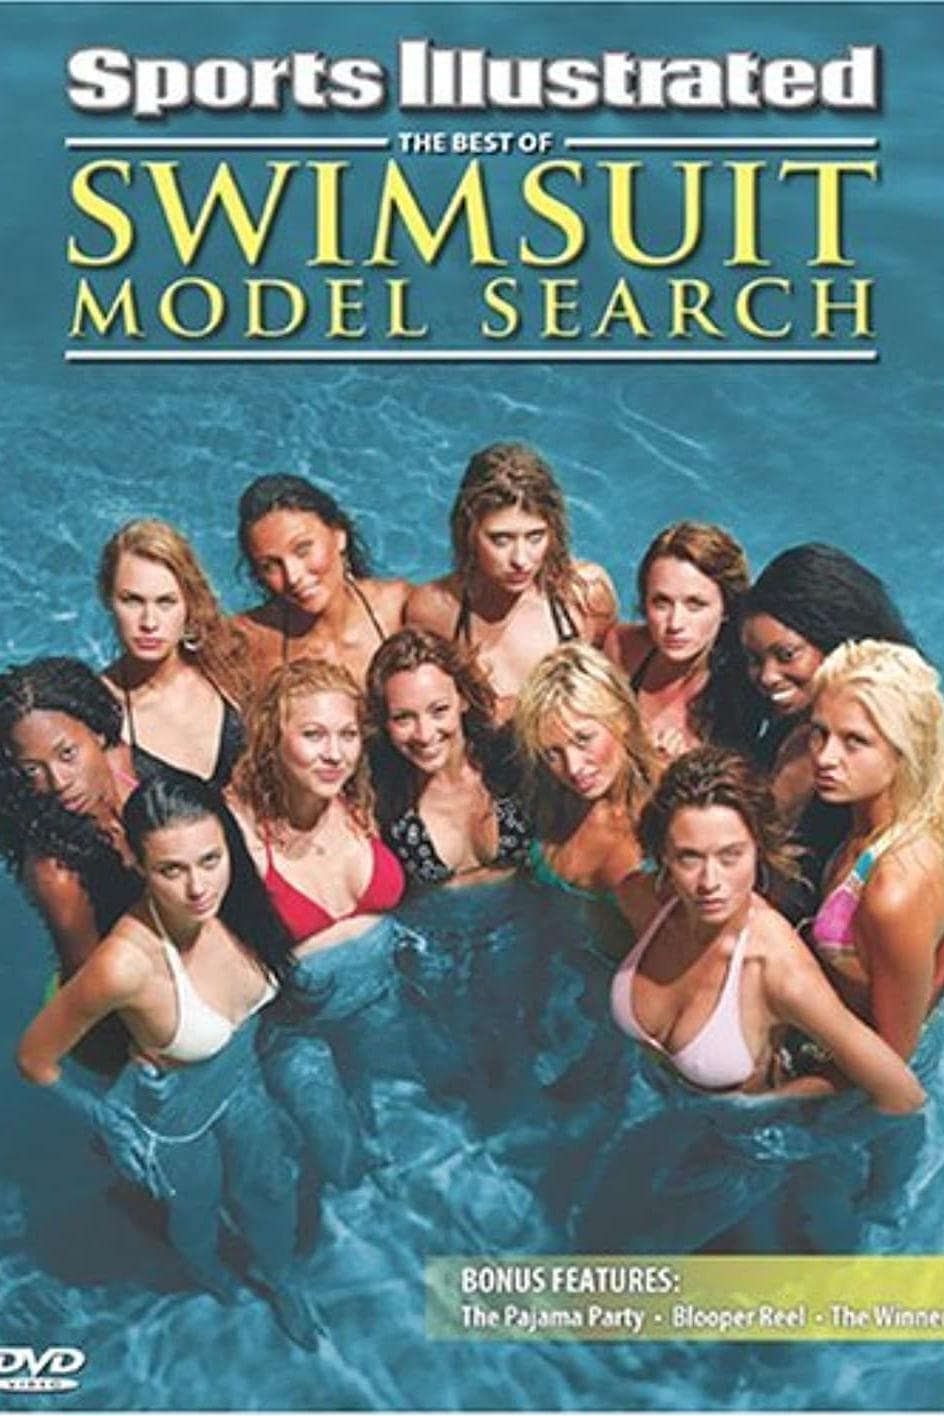 Sports Illustrated Swimsuit Model Search TV Shows About Lust